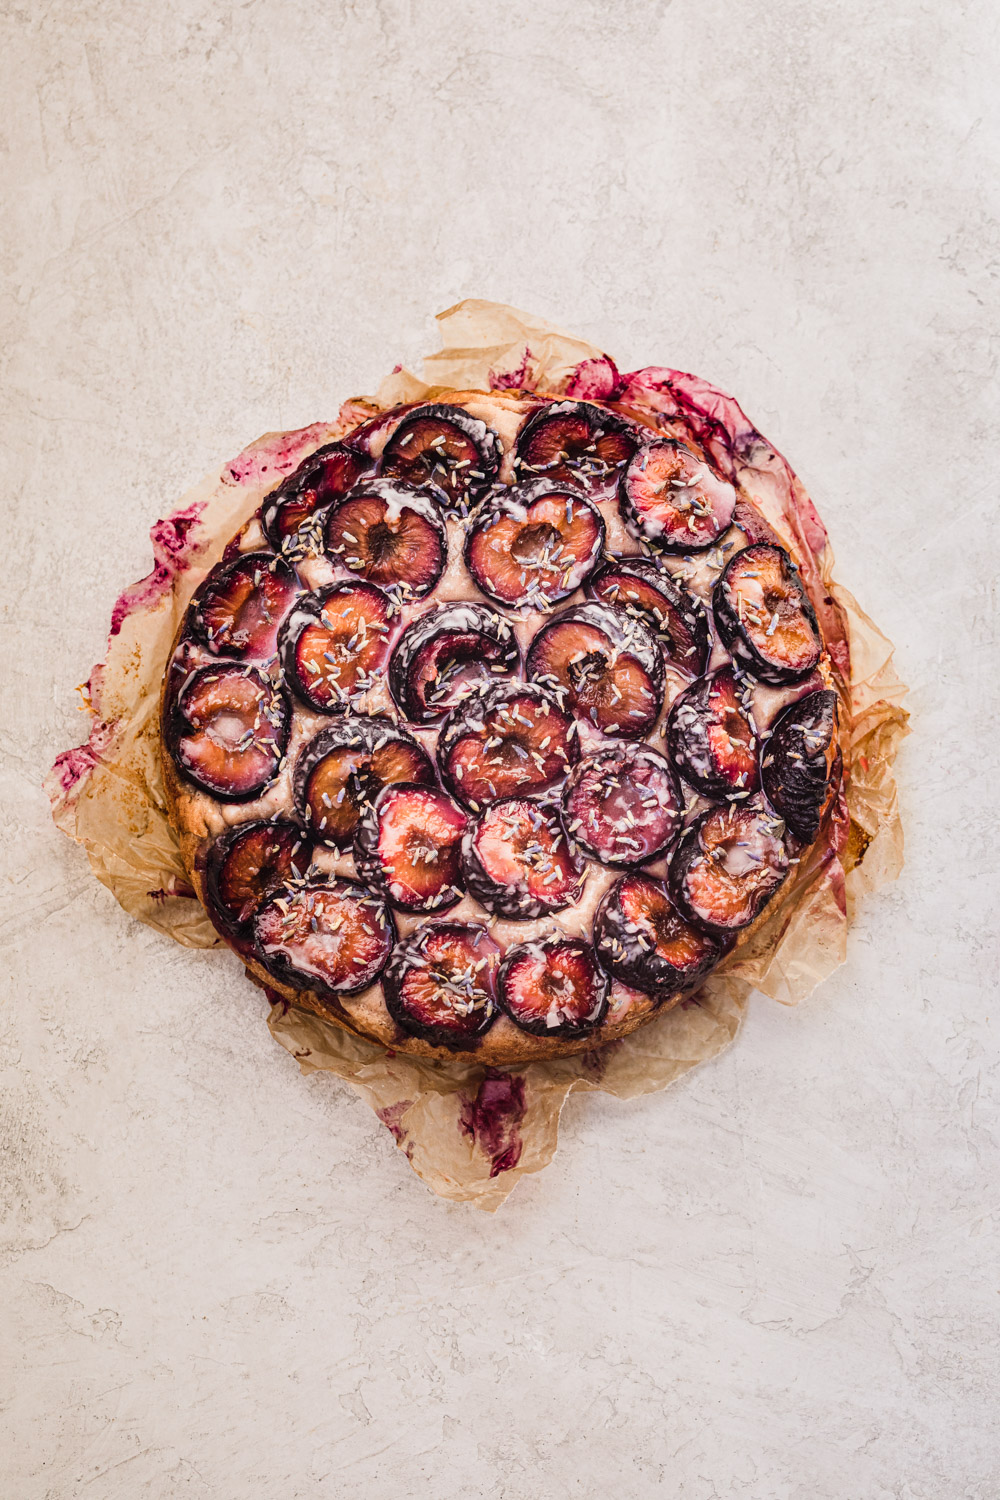 Overhead shot of the plum, walnut and lavender cake on parchment paper, on a white background.